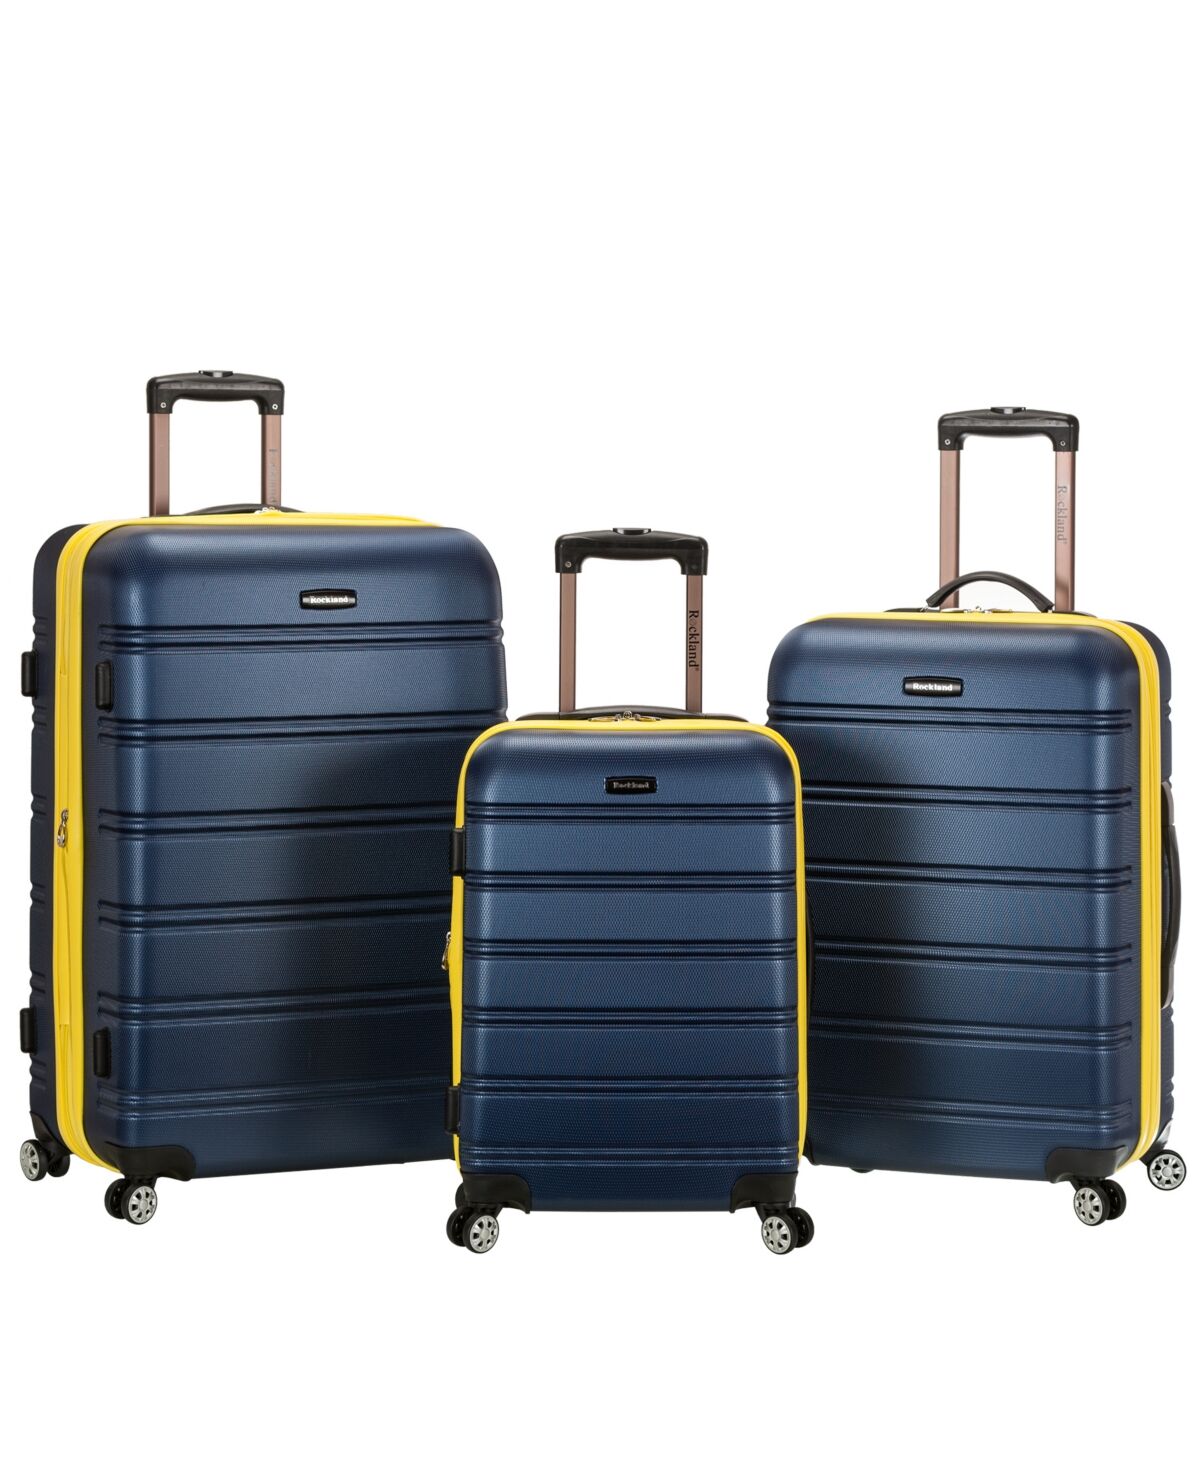 Rockland Melbourne 3-Pc. Hardside Luggage Set - Navy with Yellow Trim